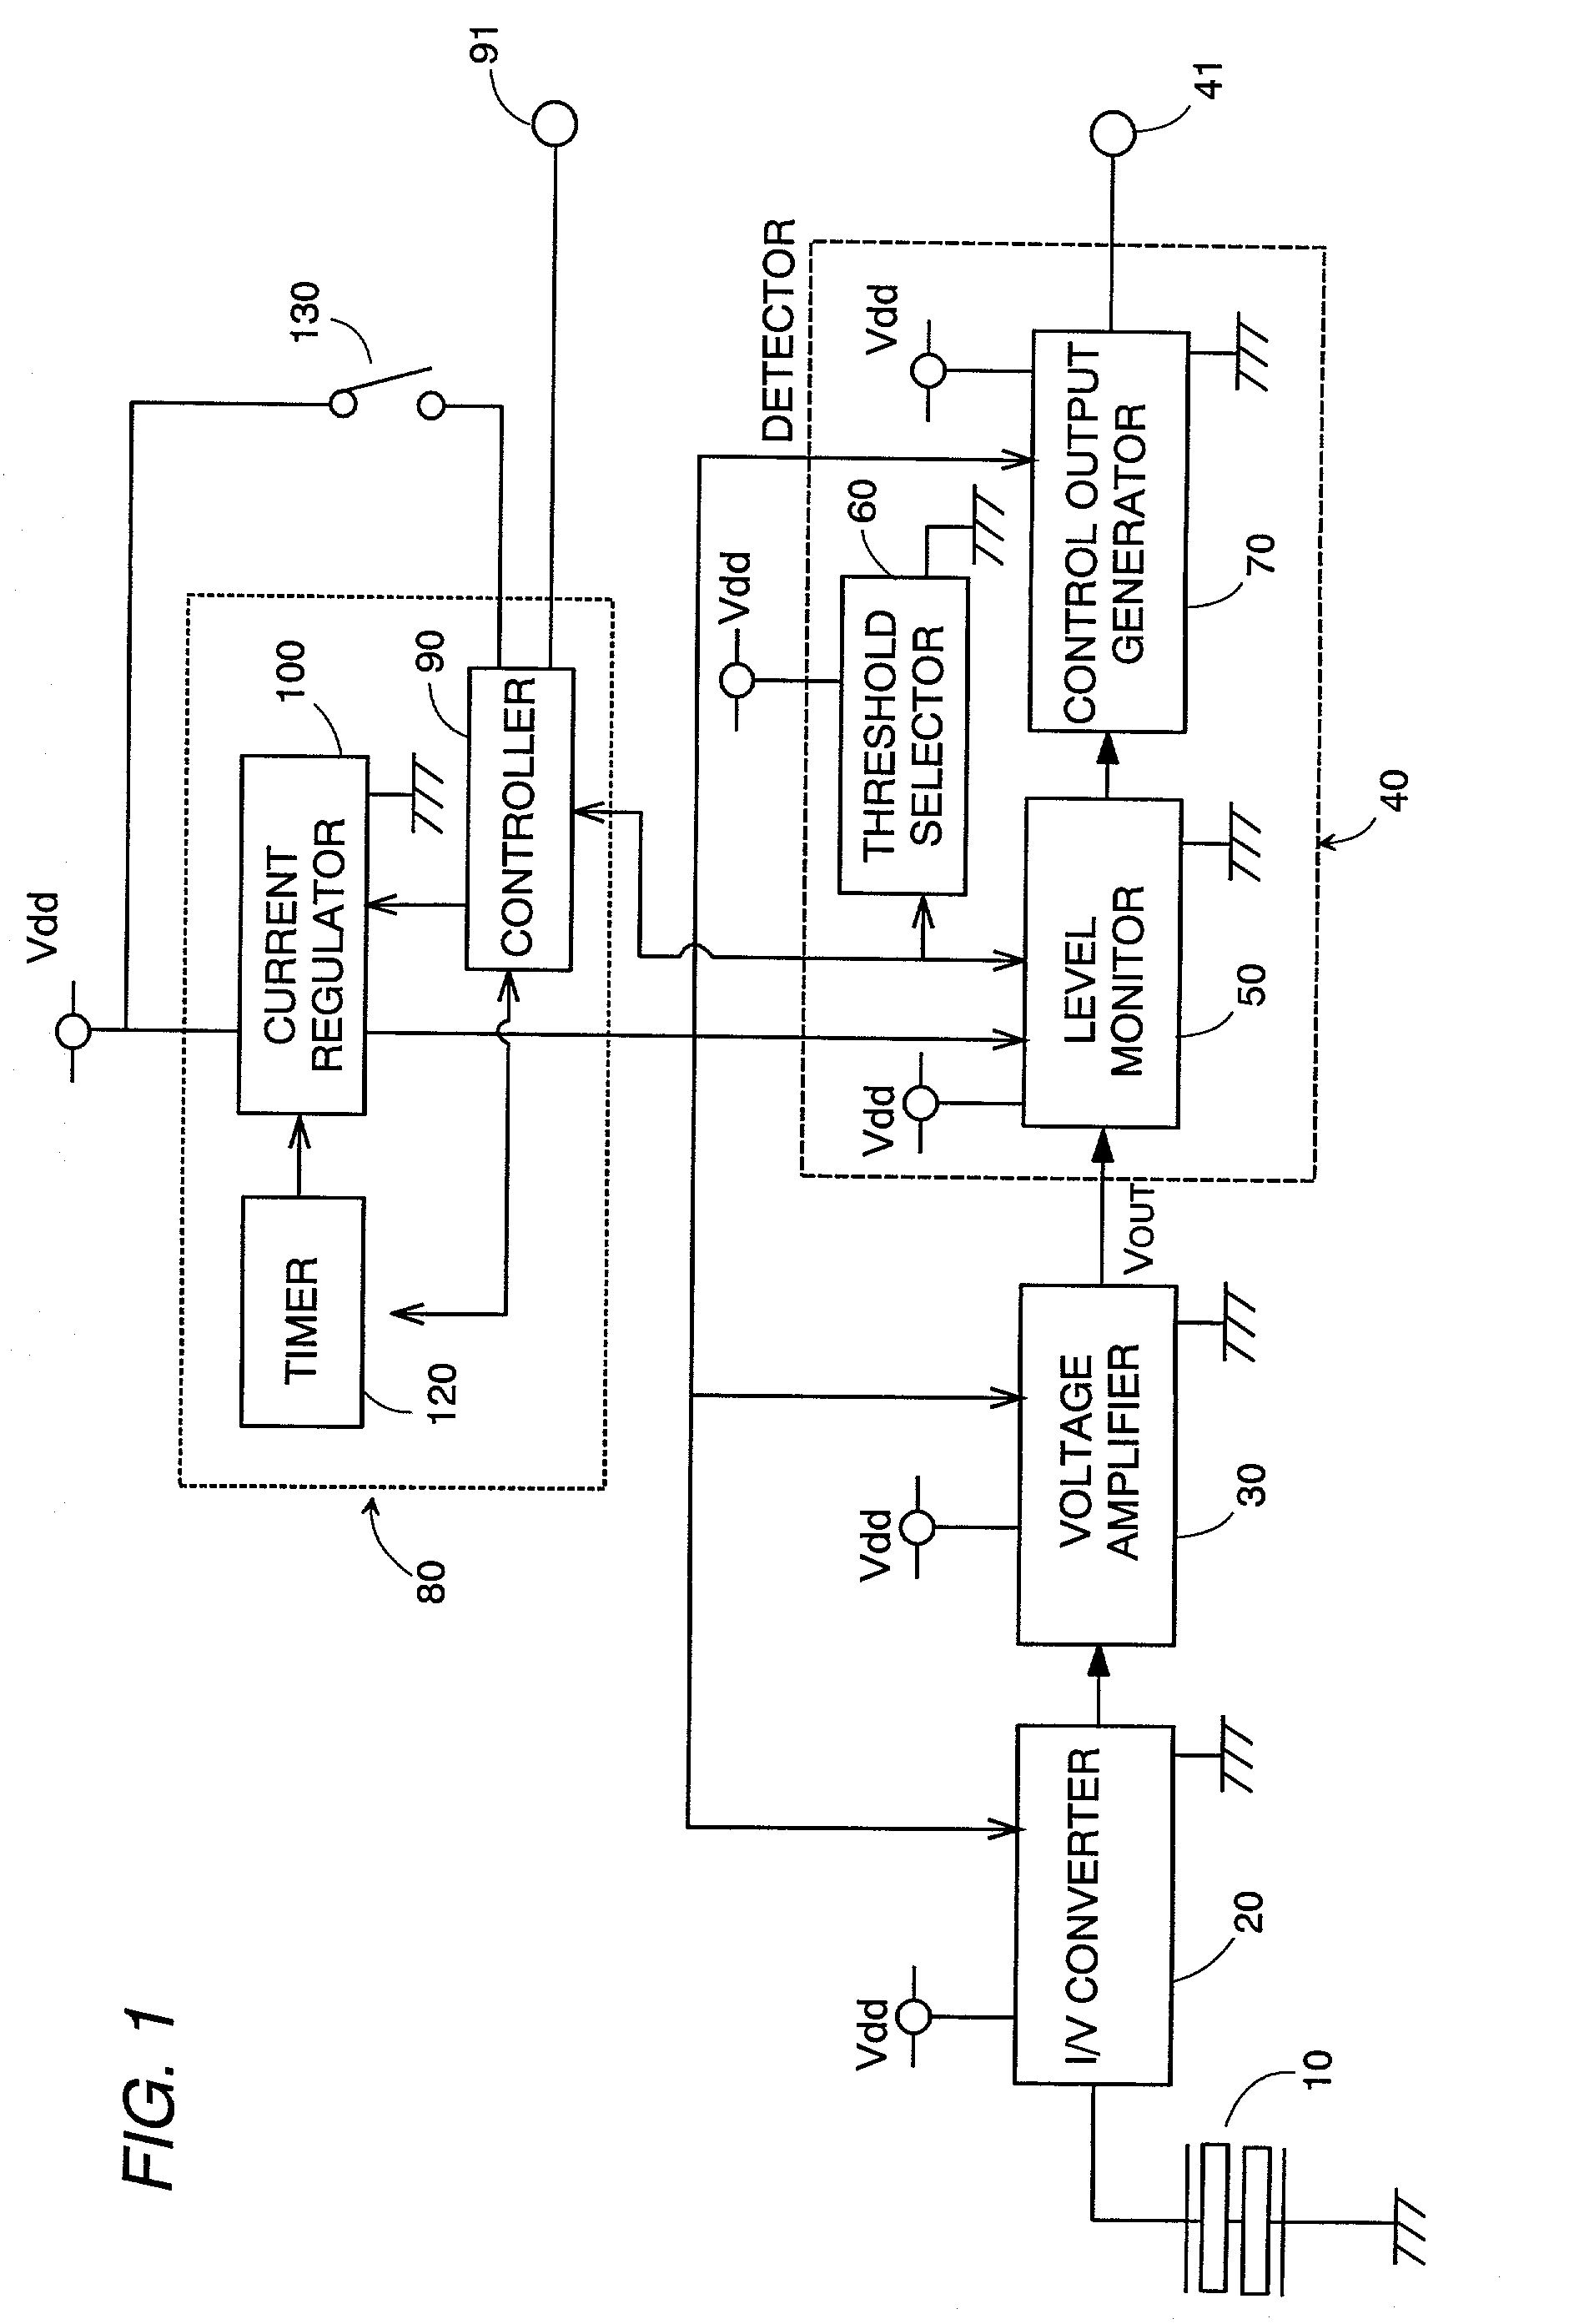 Object detecting device with a pyroelectric sensor